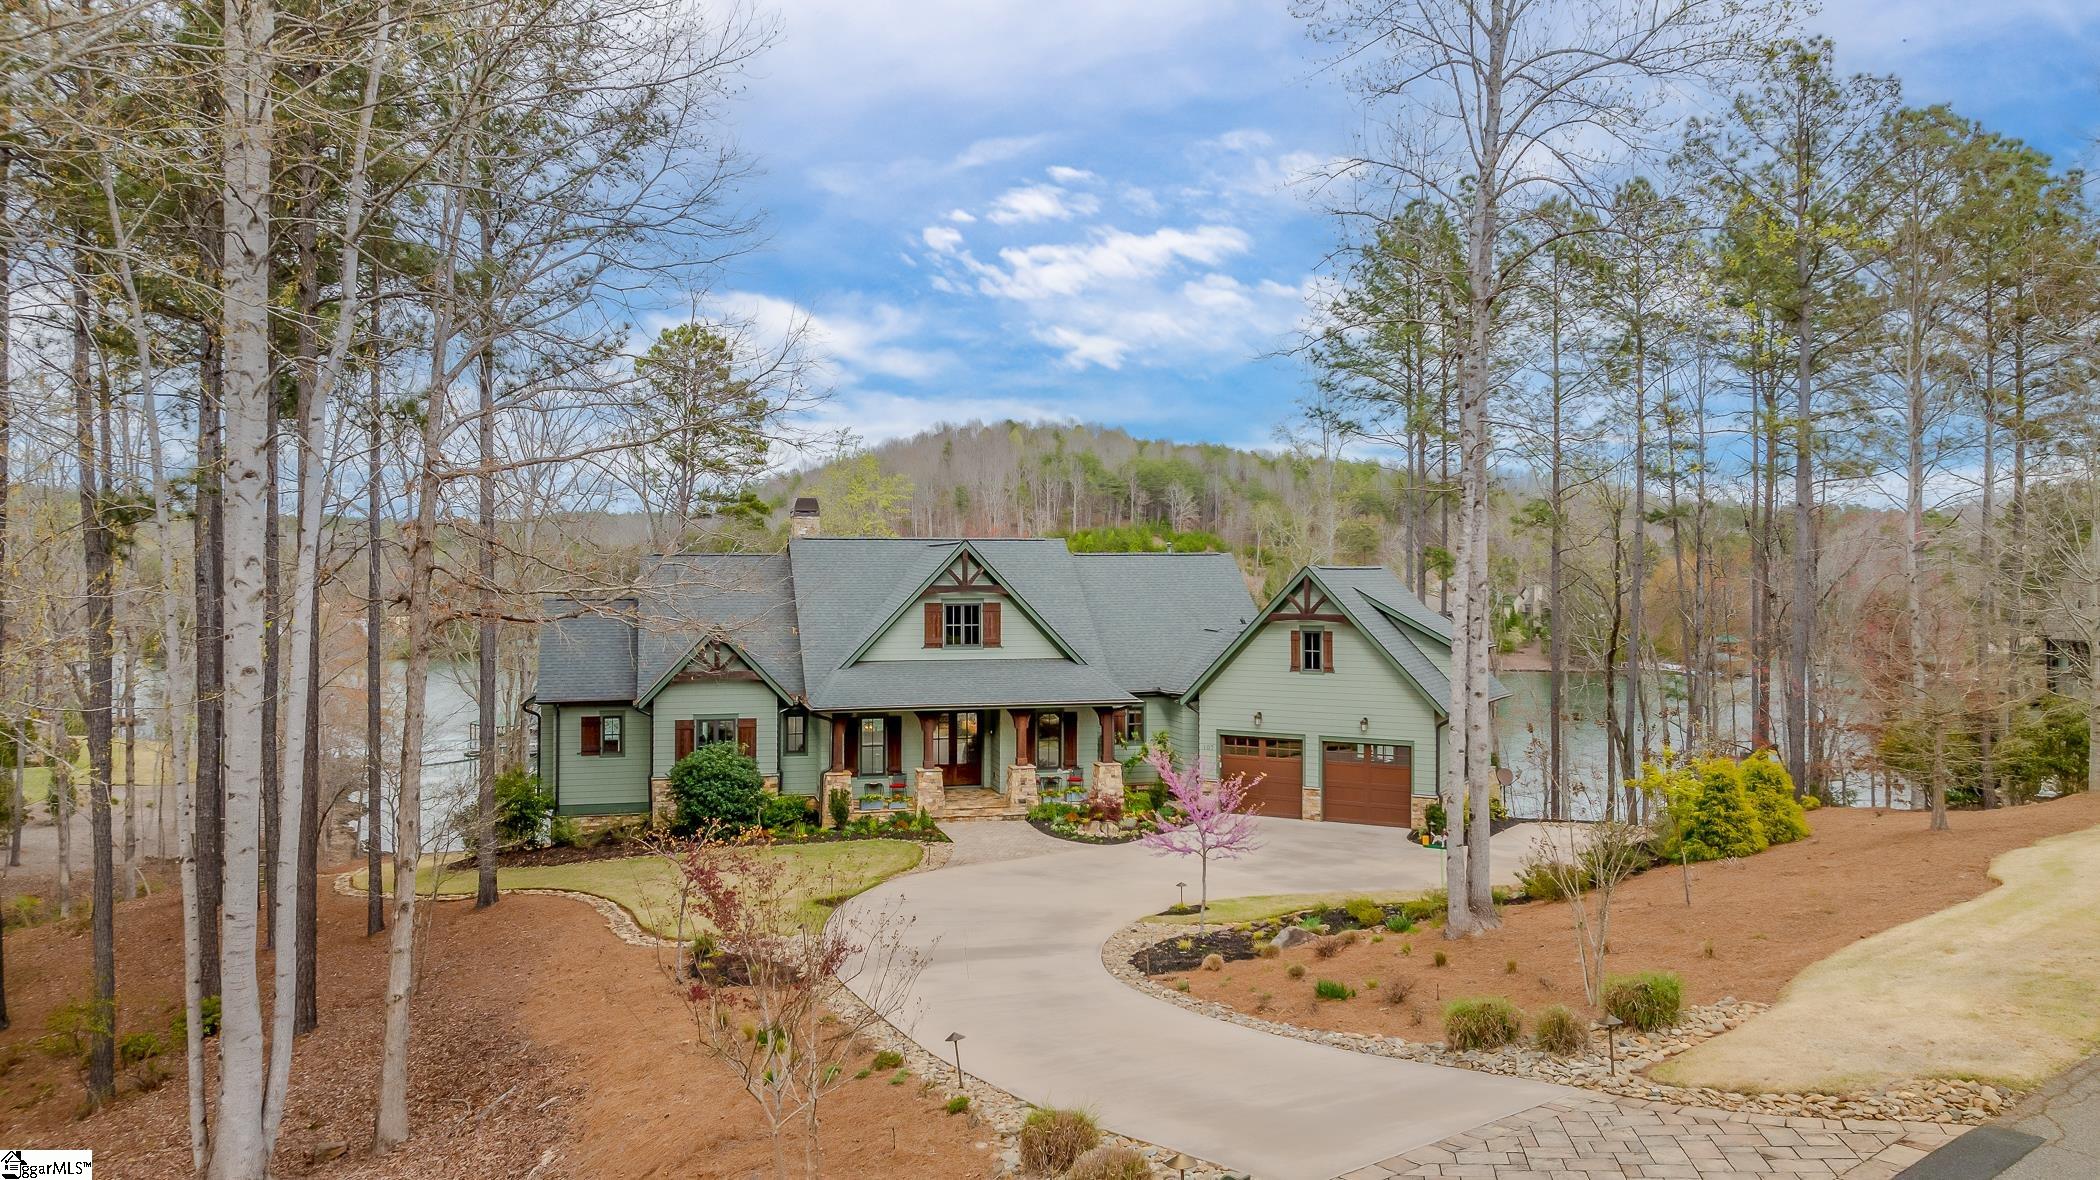 Immerse yourself in tranquility at your very own lakeside haven, located at 107 Mirror Lake Way. This exquisite 5-bedroom, 4.5-bathroom residence, custom built by Arthur Rutenberg, sits gracefully on a beautiful 1.67-acre corner lot within The Cliffs at Keowee Springs. Shielded by a natural berm, this retreat exudes a serene ambiance, along a natural woodland setting and manicured landscaped grounds. Upon entering, you're immediately greeted by breathtaking views that unfold before you. This open-concept layout effortlessly blends the great room, dining area, and kitchen, forming an inviting space ideal for hosting gatherings. Vaulted ceilings soar above, exuding a sense of grandeur, while rustic barn-wood accents scattered throughout add a touch of timeless charm. Yet, it's the expansive windows that steal the spotlight, offering enchanting glimpses of the serene lake from nearly every vantage point. The spacious gourmet kitchen with a wooden coffered ceiling includes all GE Monogram stainless appliances, a generous island with quartz countertops, and a full walk-in pantry. It combines style with functionality for all your entertainment needs. Step outside, where the screen porch and deck unveil an enchanting backdrop for outdoor gatherings, seamlessly blending the boundaries between indoor and outdoor living. Picture yourself on your deck, holding a cup of coffee as the sun begins to rise. The air is still and cool, promising a refreshing start to the day. Expandable glass doors effortlessly connect these spaces, inviting the beauty of nature indoors. Complete with a built-in Blaze BBQ grill and retractable screens, versatility and comfort are elevated, ensuring unforgettable moments with friends and family. In the master bedroom and bath, revel in breathtaking views of the lake. An additional upper level bedroom, boasting an en-suite bath and office area, awaits.  With the inclusion of a conveniently located laundry room, all your essential living spaces are thoughtfully situated on a single floor, ensuring seamless daily living. Descend to the lower level, where a wet bar and recreational room await, perfect for entertaining guests or unwinding after a long day. Discover three additional bedrooms on the lower level all with lake views; one featuring an ensuite bath, while the others share a bathroom, ensuring comfort for all. A spacious hidden workshop space adds versatility and can easily transform into a lake room for storing equipment and pursuing hobbies. Additionally, a sizable unfinished storage area offers ample room for meeting seasonal needs and storing belongings. Step onto the back porch, where you'll find a covered area perfect for smoking and grilling, as well as ample space for outdoor activities such as ping pong matches and games. A charming outdoor stone fire pit awaits, offering warmth and ambiance on cooler days while you soak in the beauty of the lake. With approx 220 feet of lake frontage, this property features a covered dock complete with a boat lift, water and electric utilities, and a Shock IQ electric safety system. Whether you're floating, swimming, paddle boarding, or kayaking within the cove, this location offers the perfect setting for family relaxation and water-based adventures. Come be part of the The Cliffs 7 communities and enjoy lake life at The Springs. You are close to all the amenities: pickle-ball and tennis courts, Tom Fazio golf course, new club house, fishing pond and dog park are a short golf cart ride away. A right to purchase a Cliffs Club membership is available.